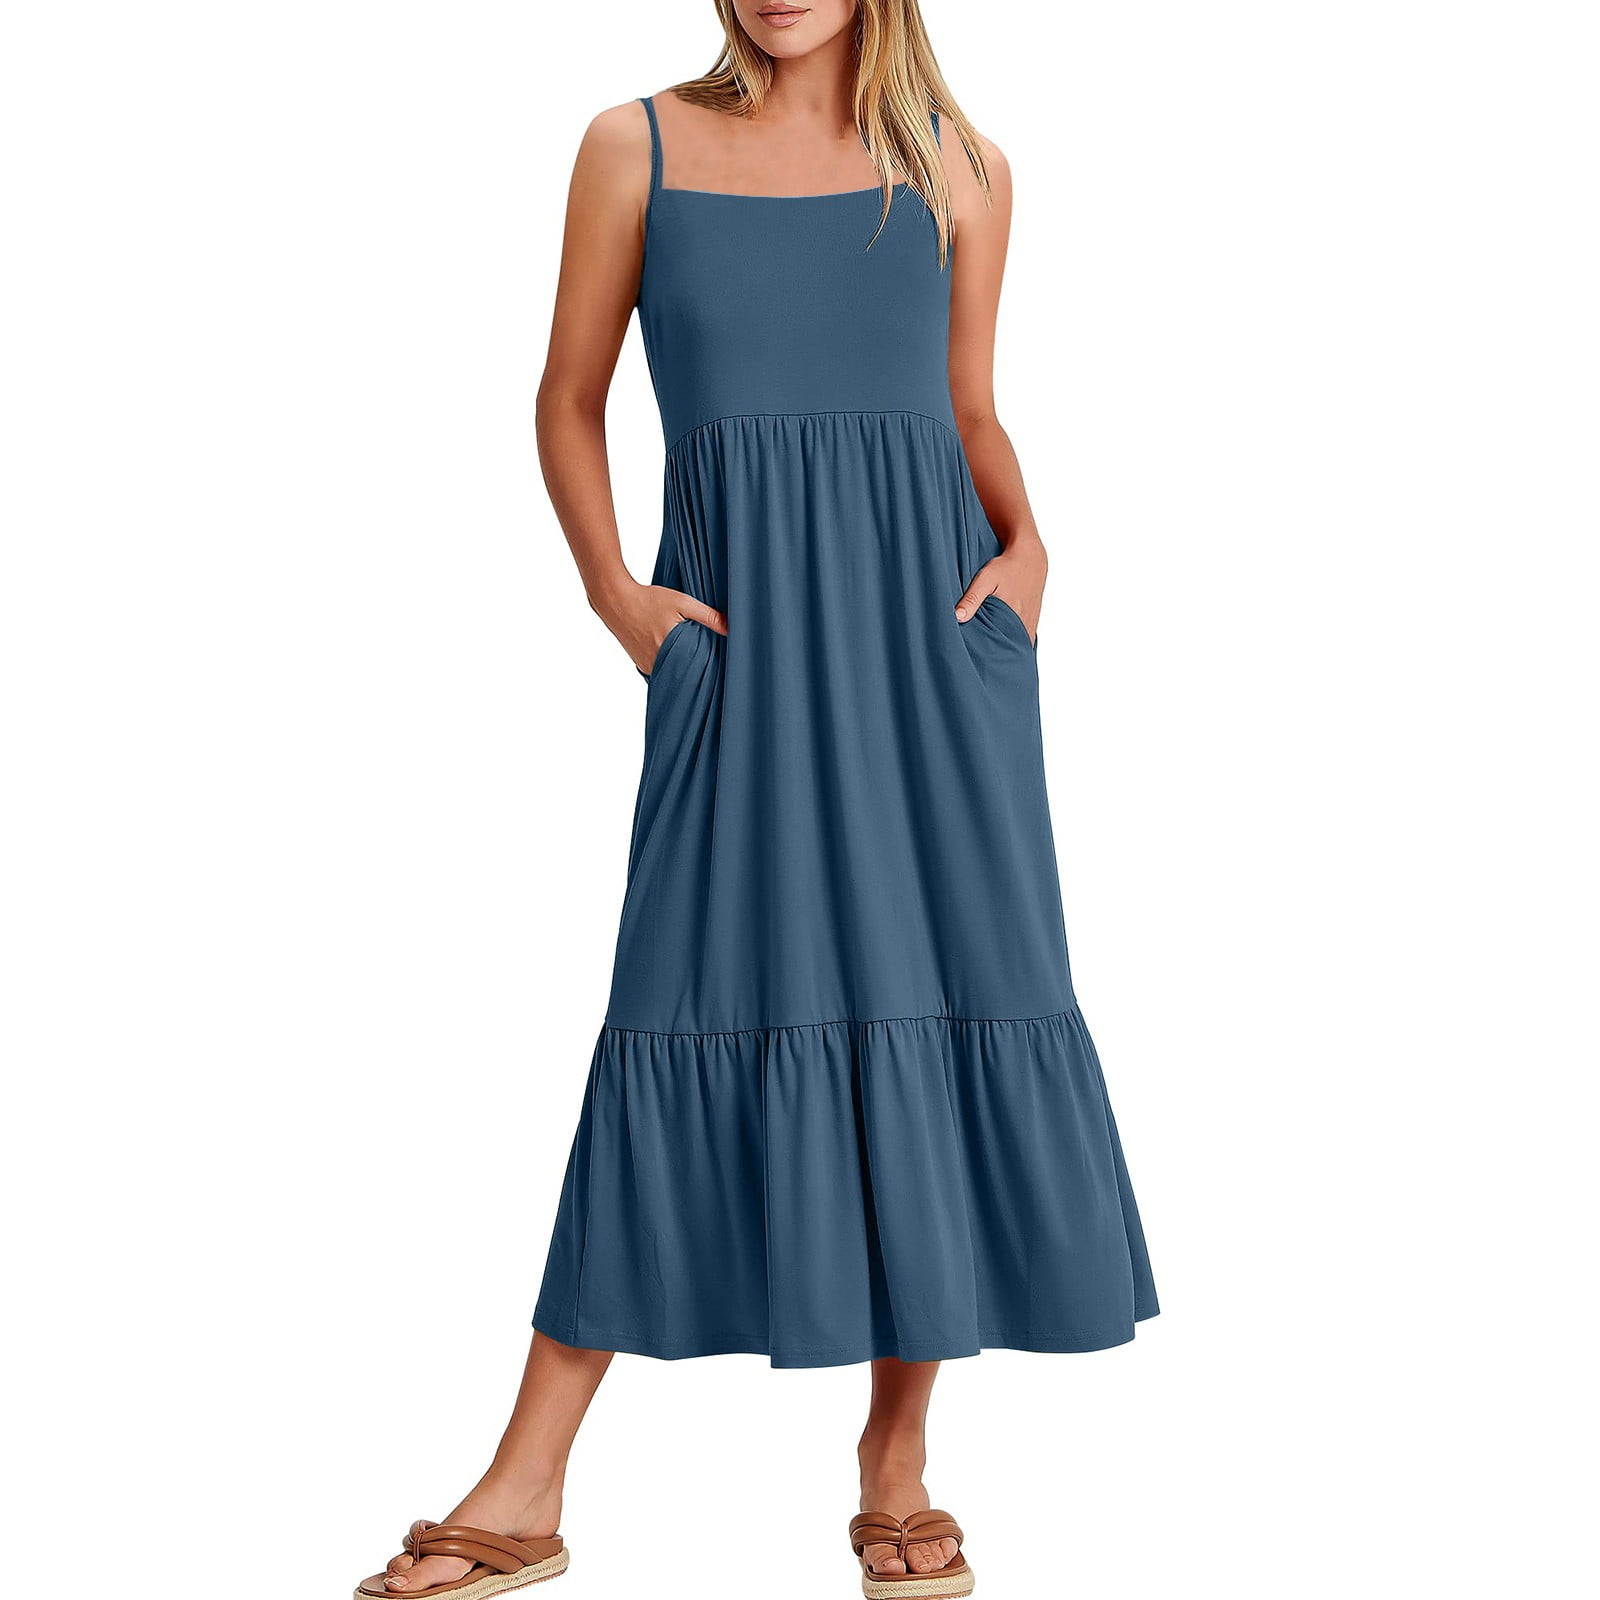 Finelylove Sundresse For Woman Dresses That Hide Belly Fat V-Neck Solid  Sleeveless Wrap Navy